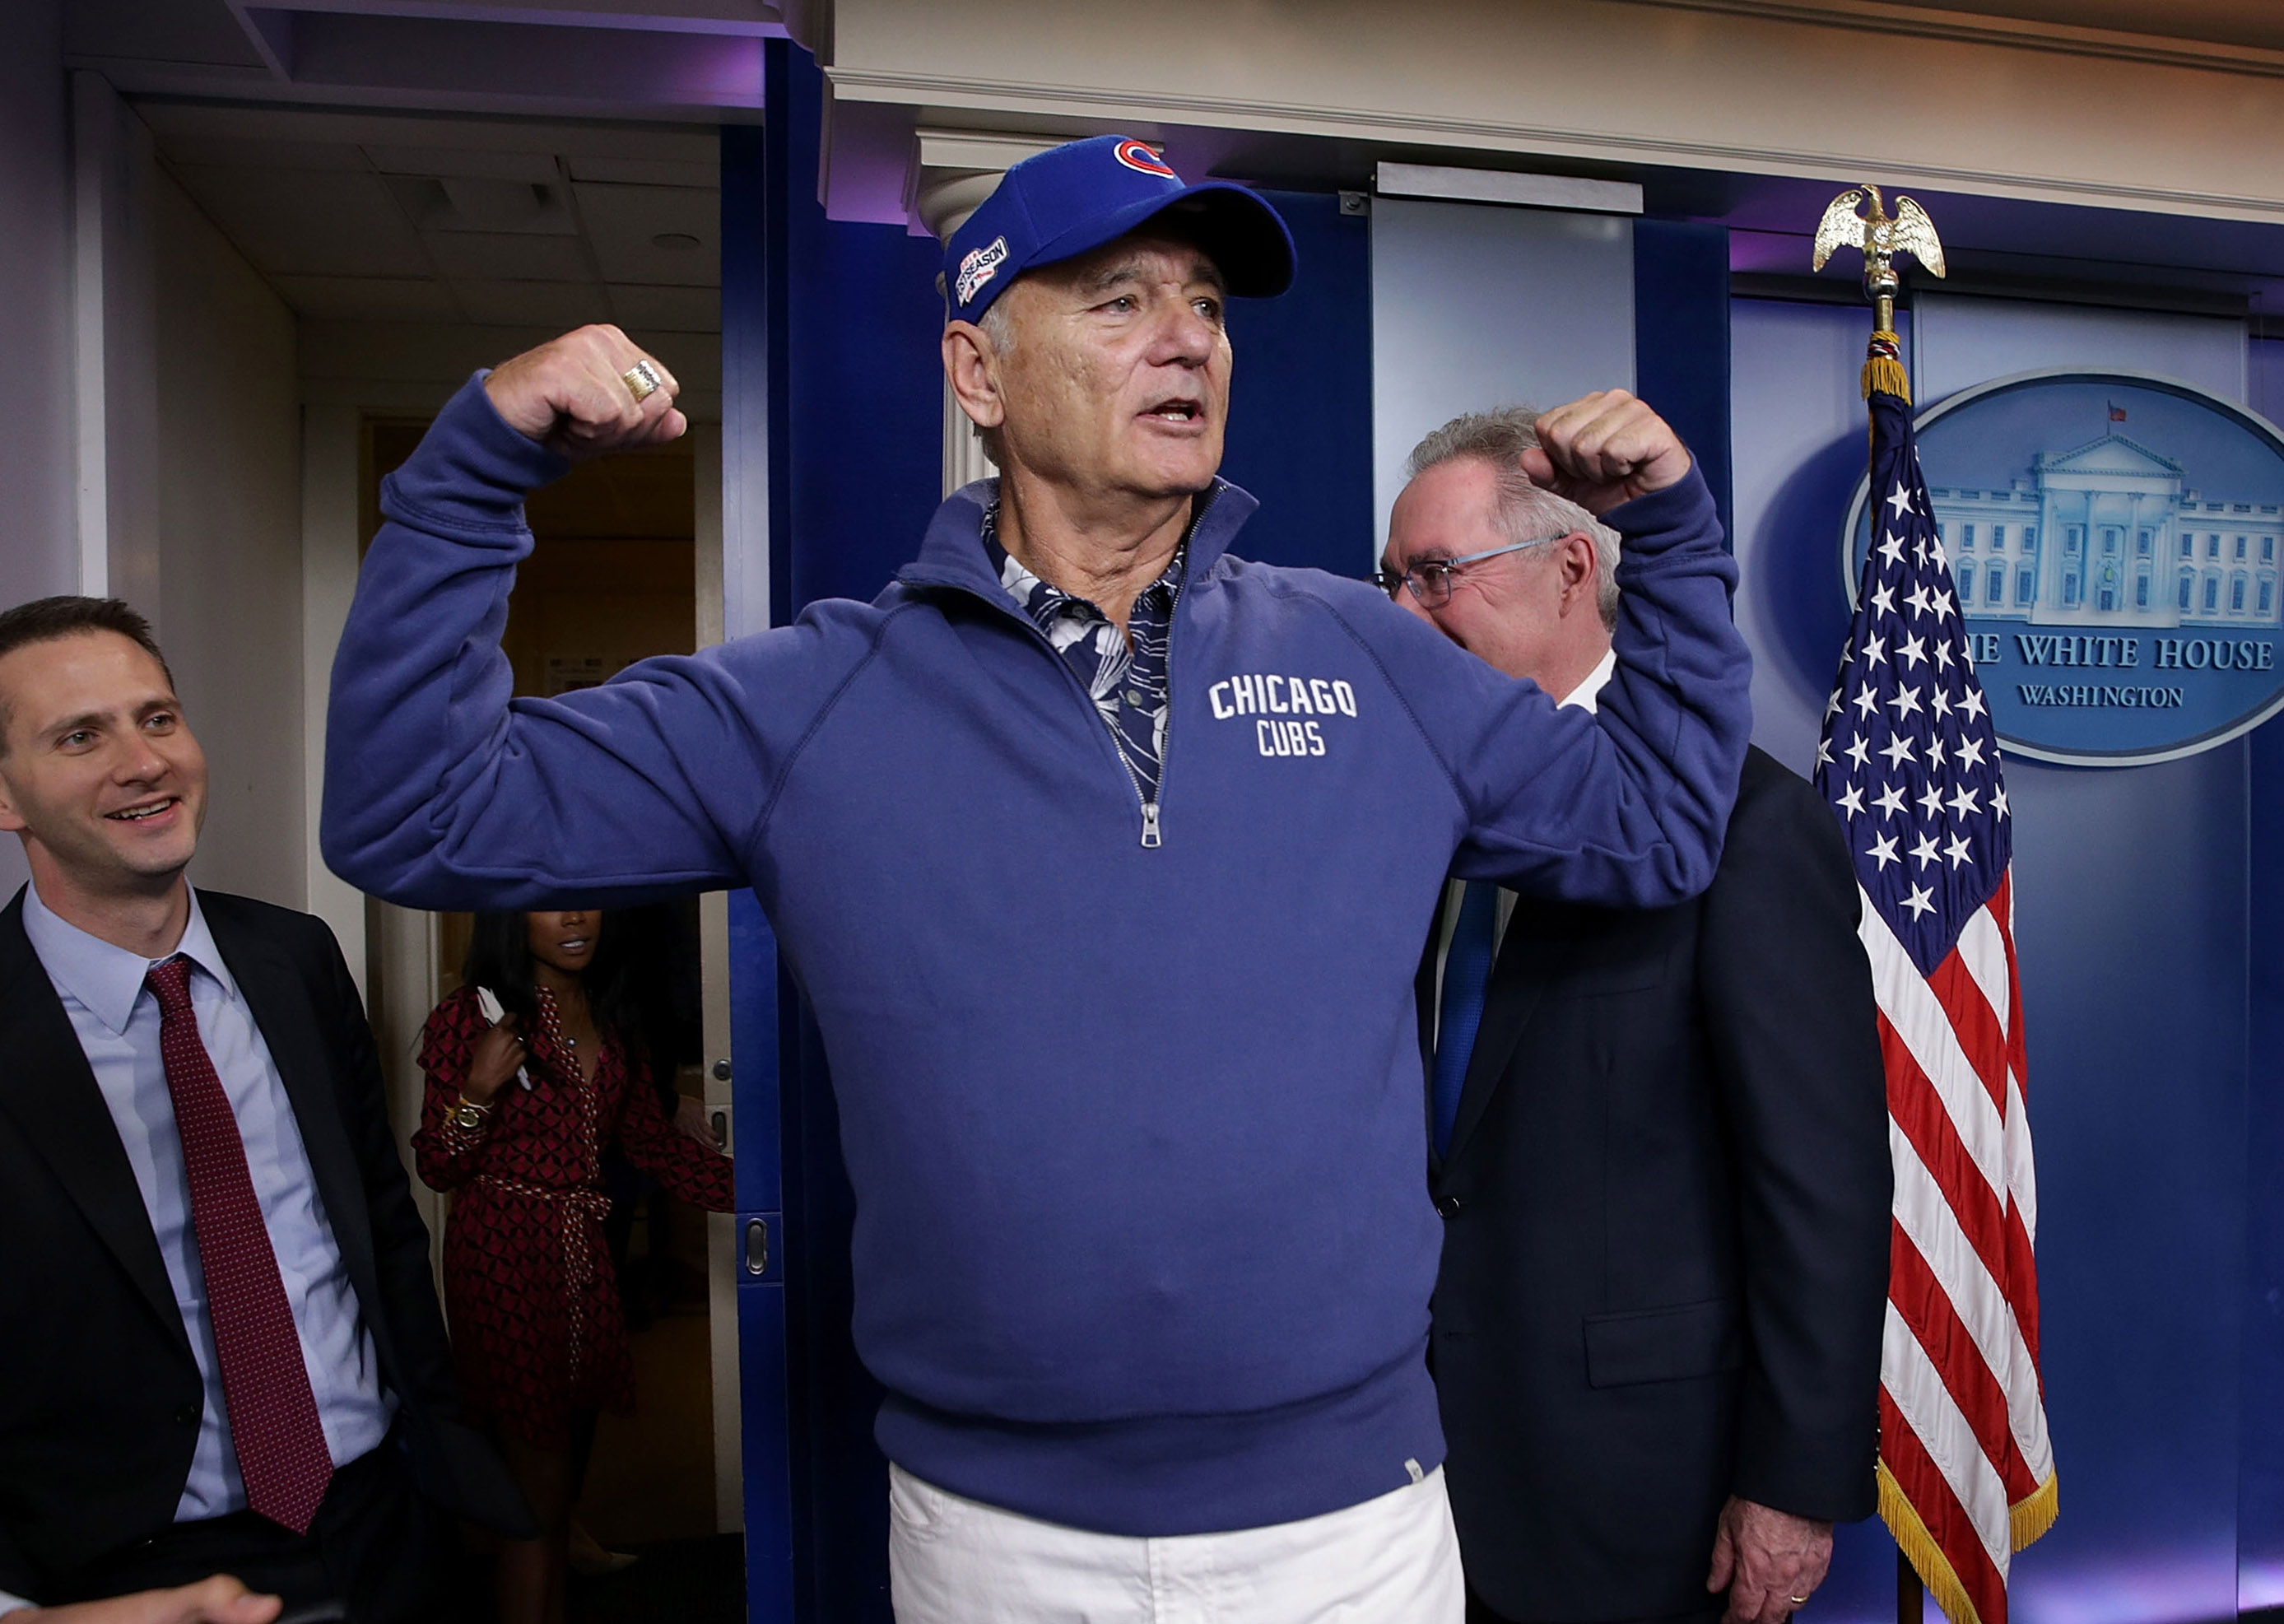 Bill Murray Makes Surprise Appearance at White House Briefing Room